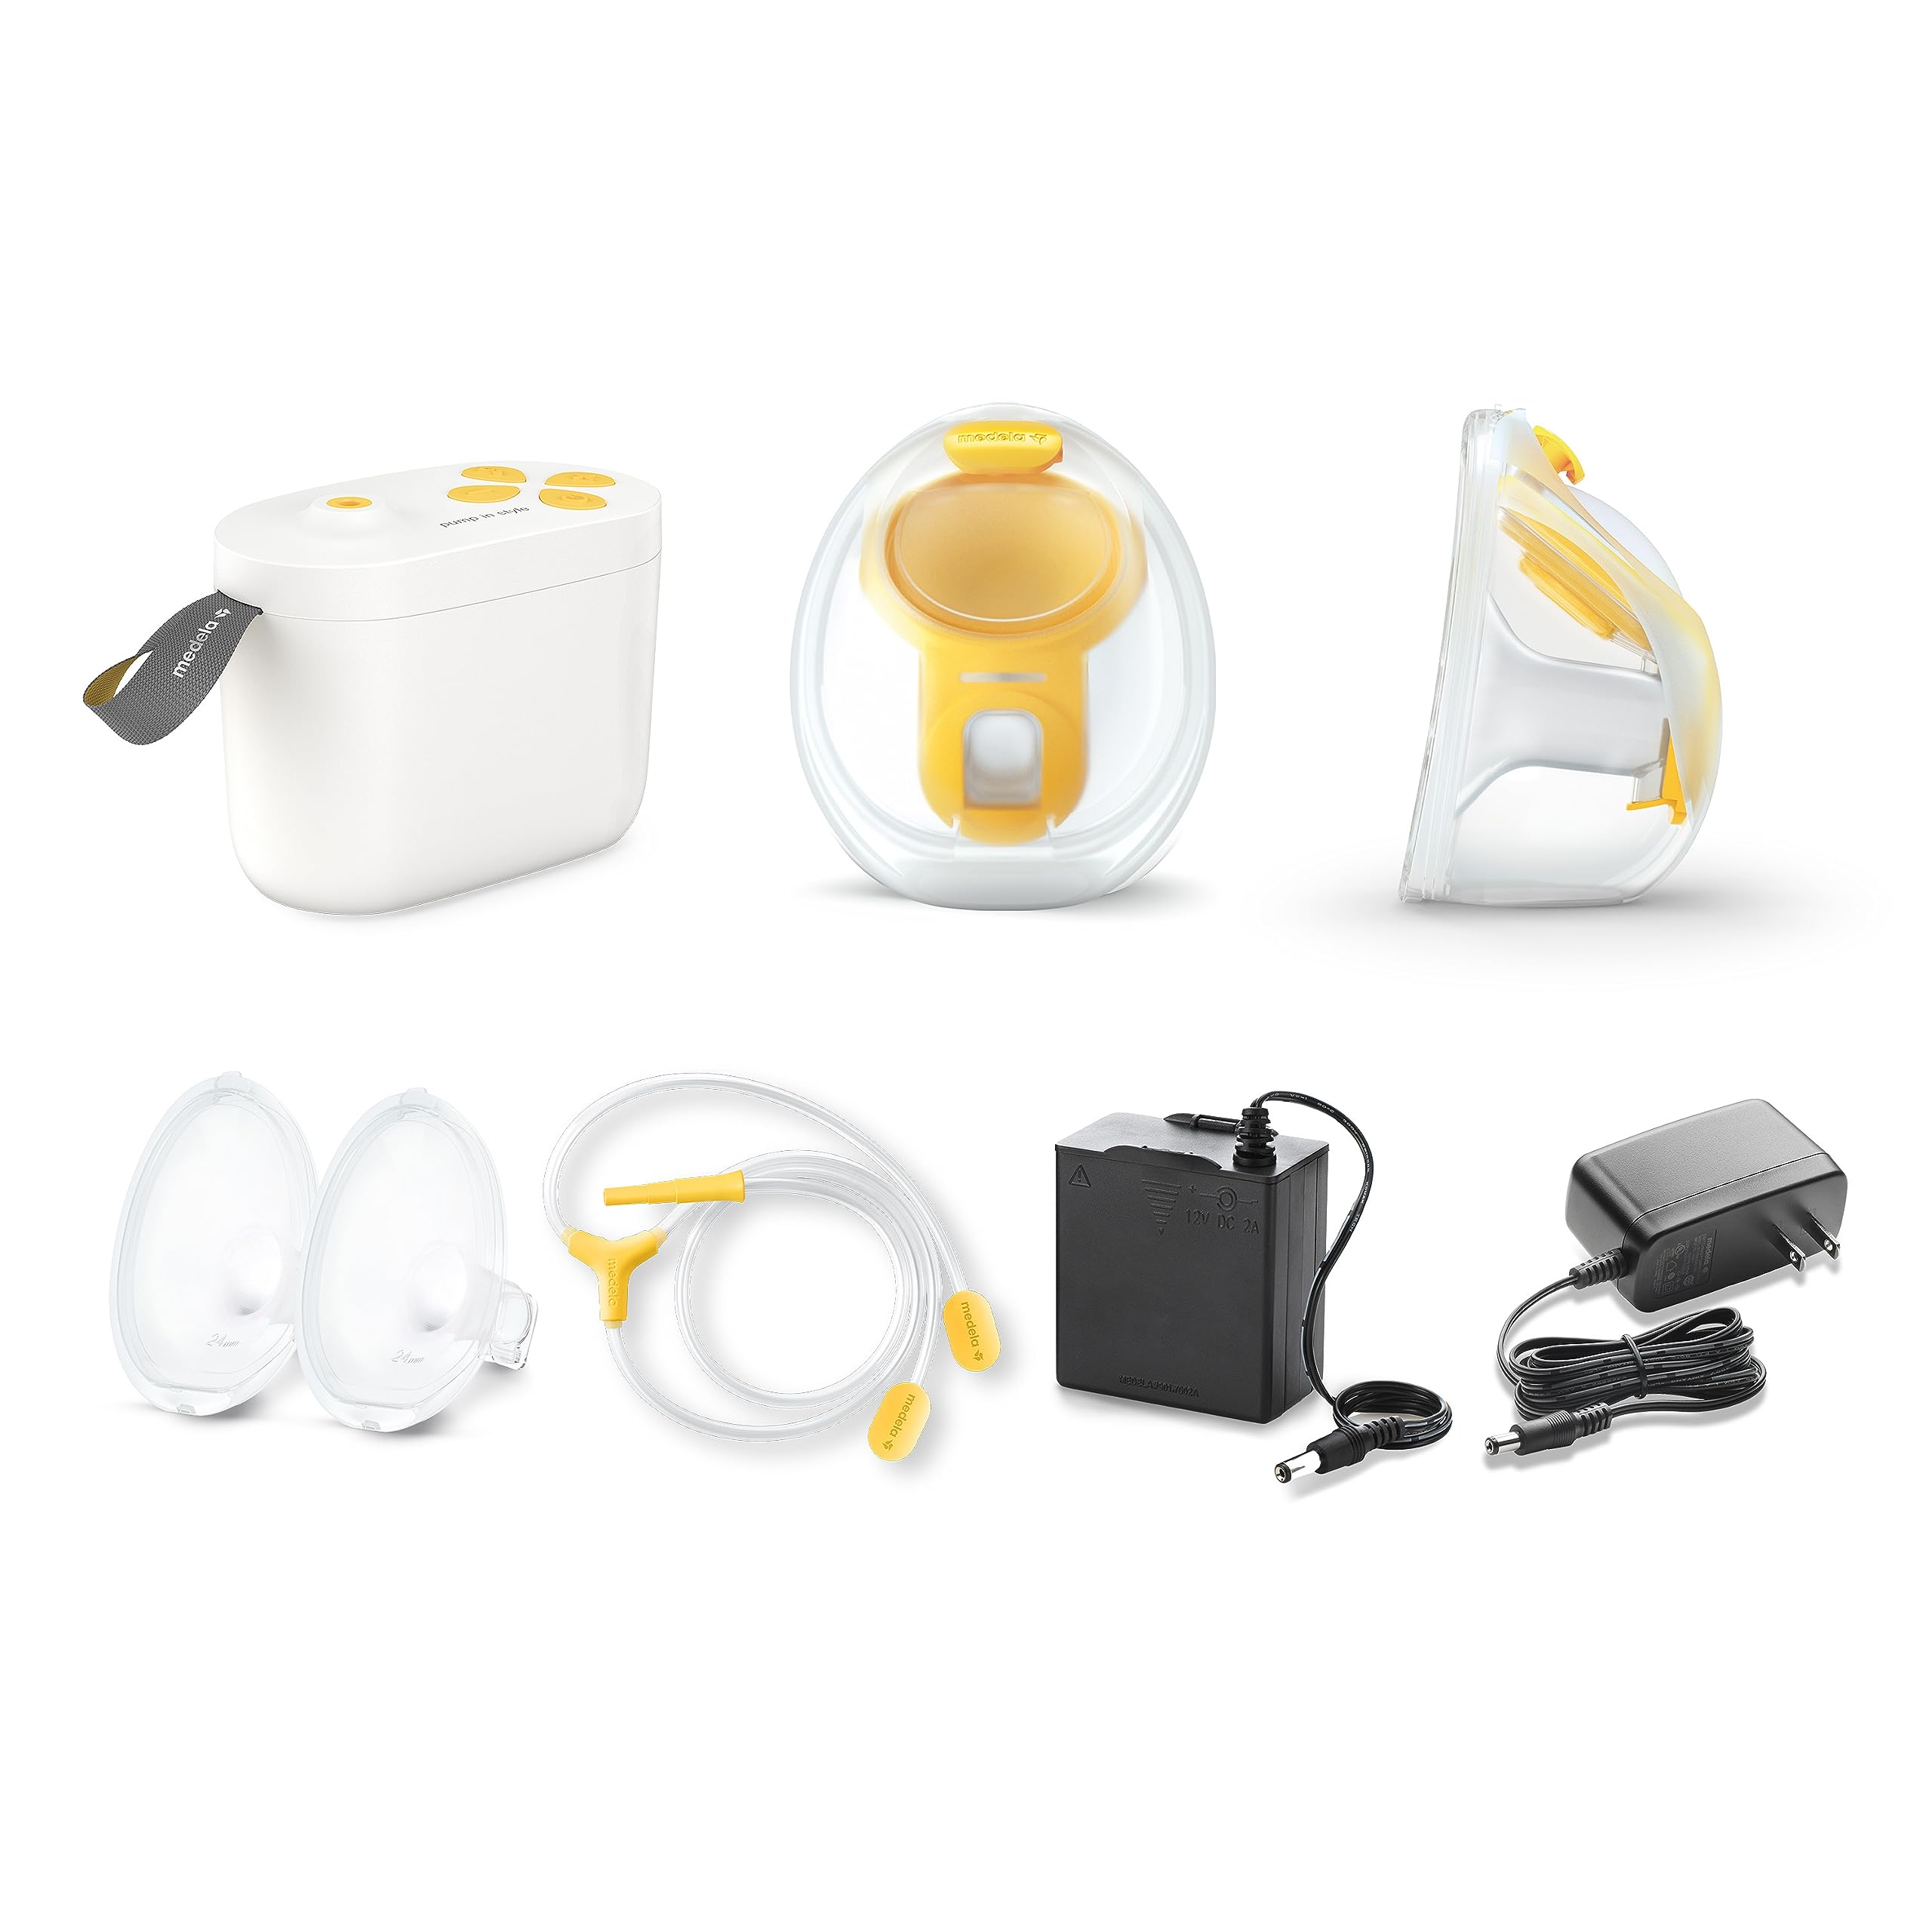 Medela Pump in Style Hands-Free Breast Pump, Wearable Cups, Portable and Discreet Double Electric Breast Pump